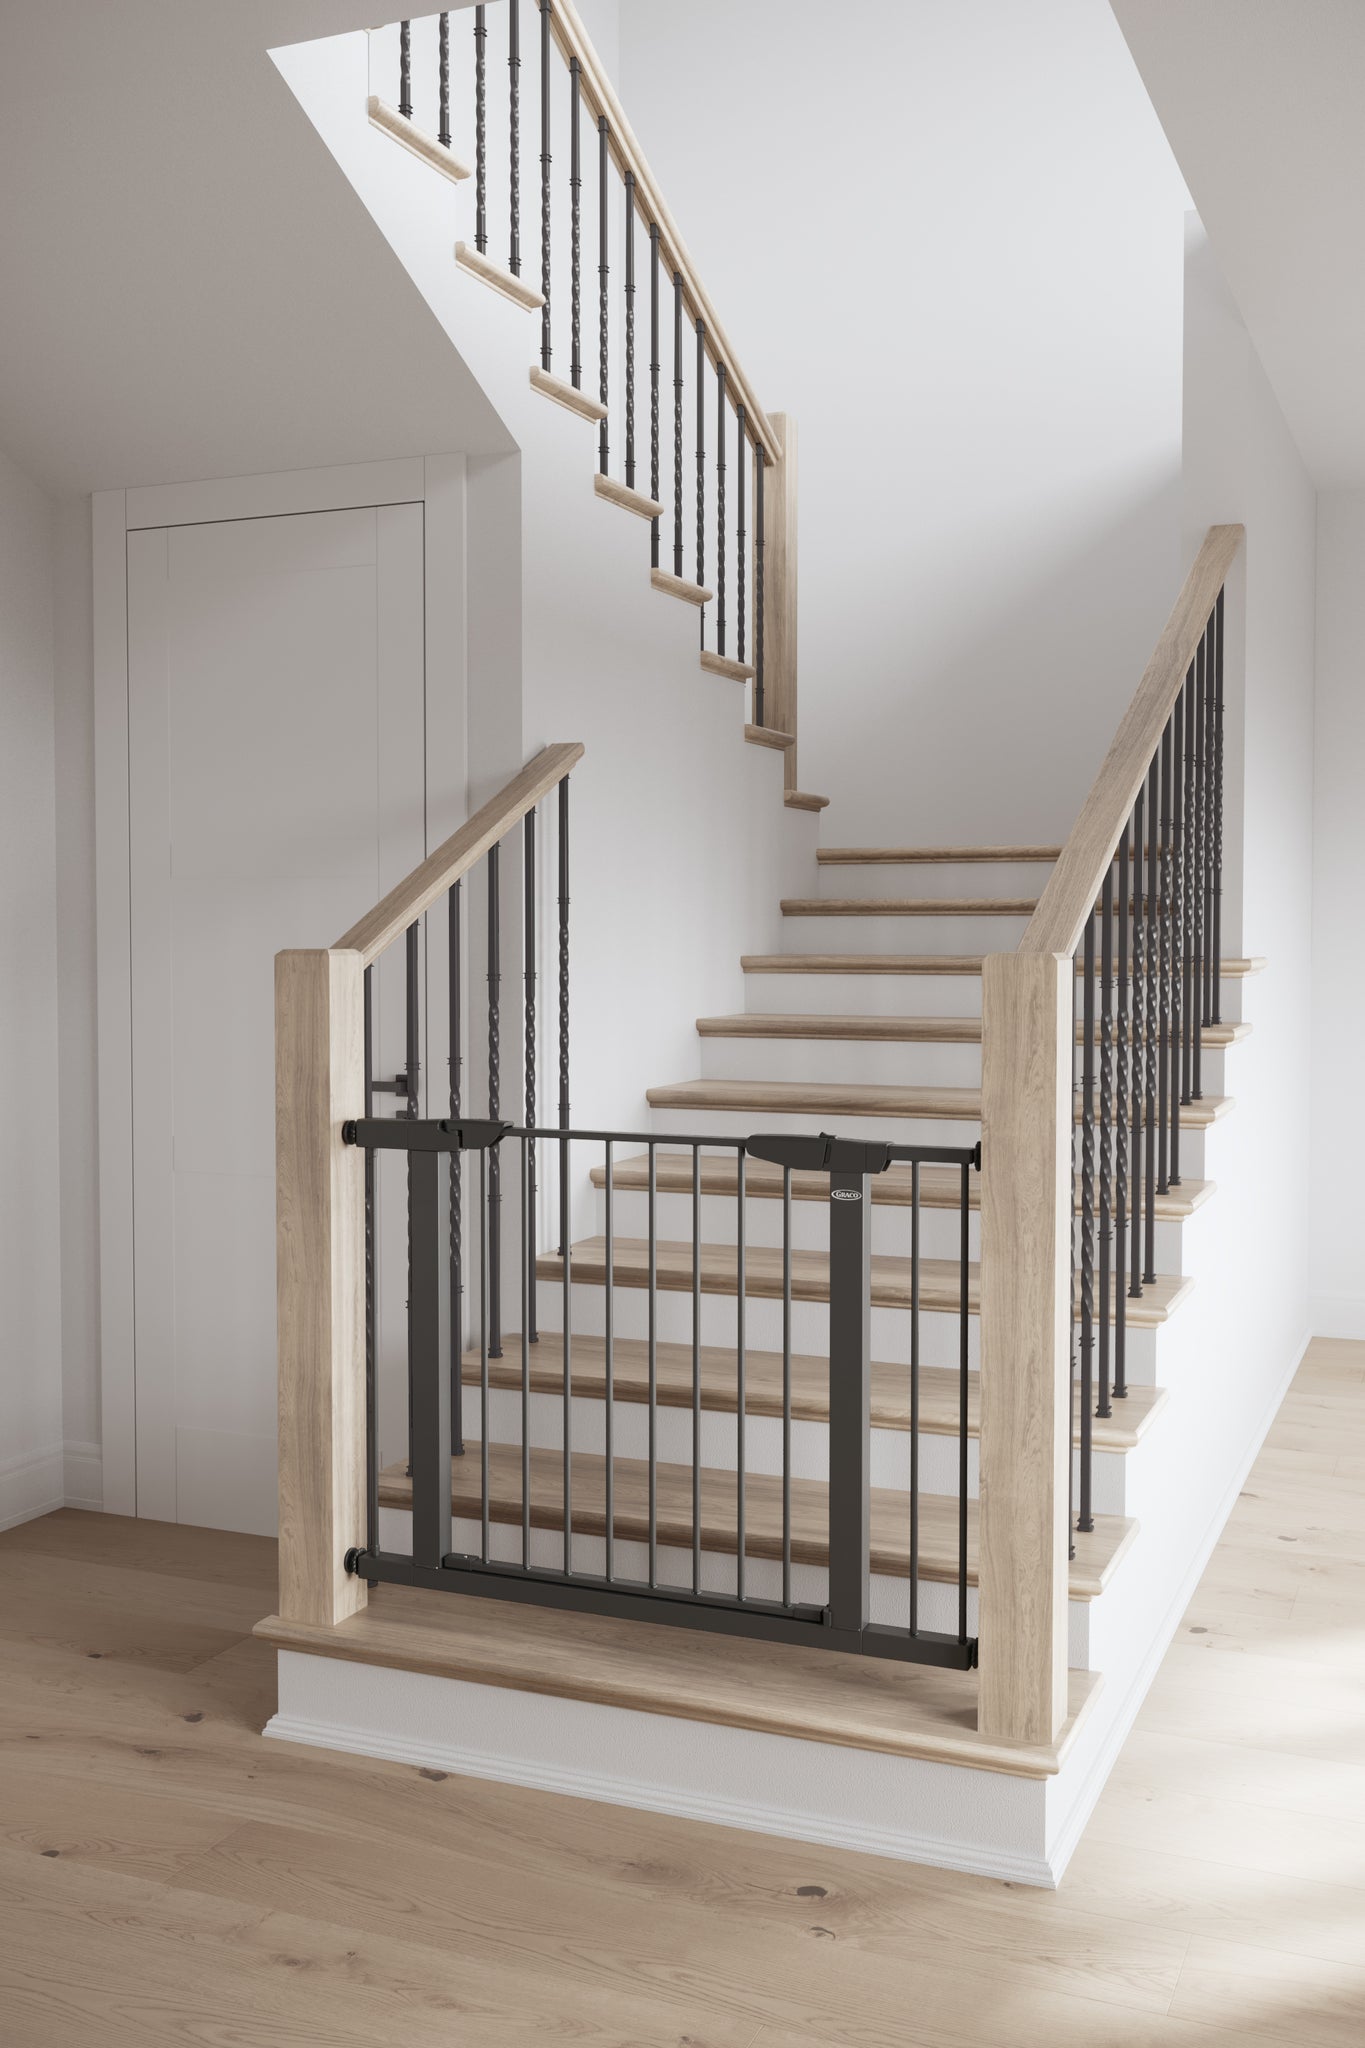 gray safety gate installed in stairs